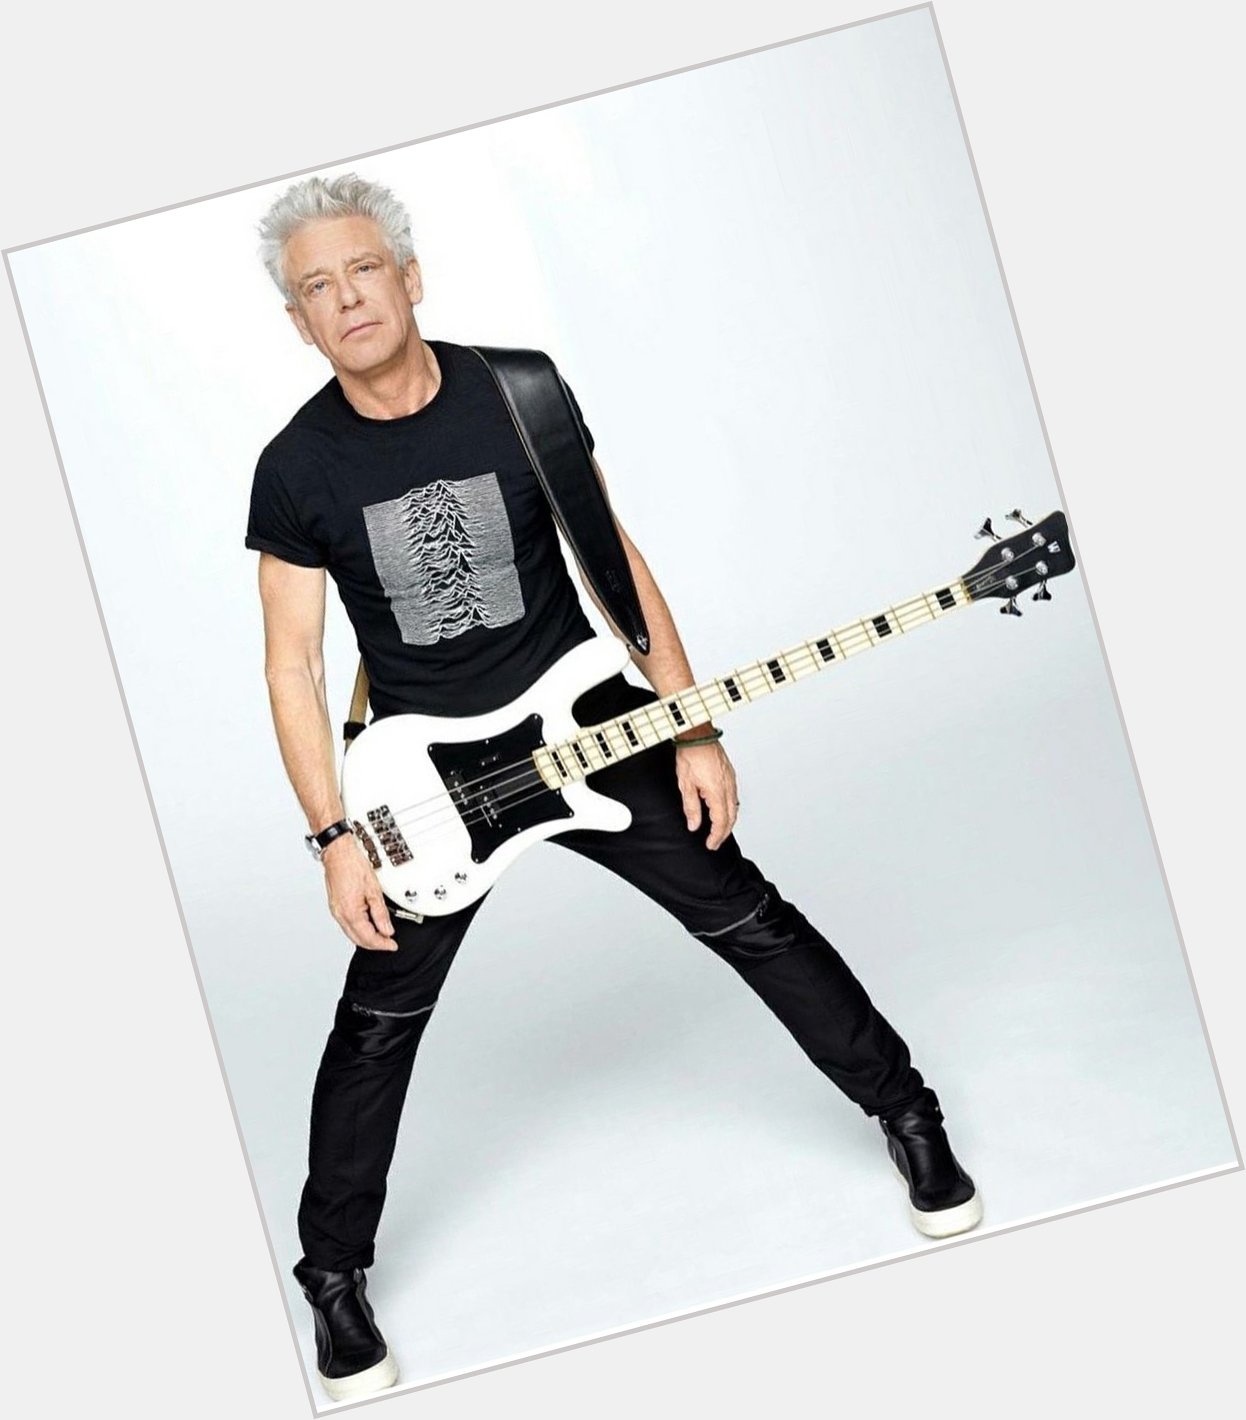 Also happy birthday to Adam Clayton from 